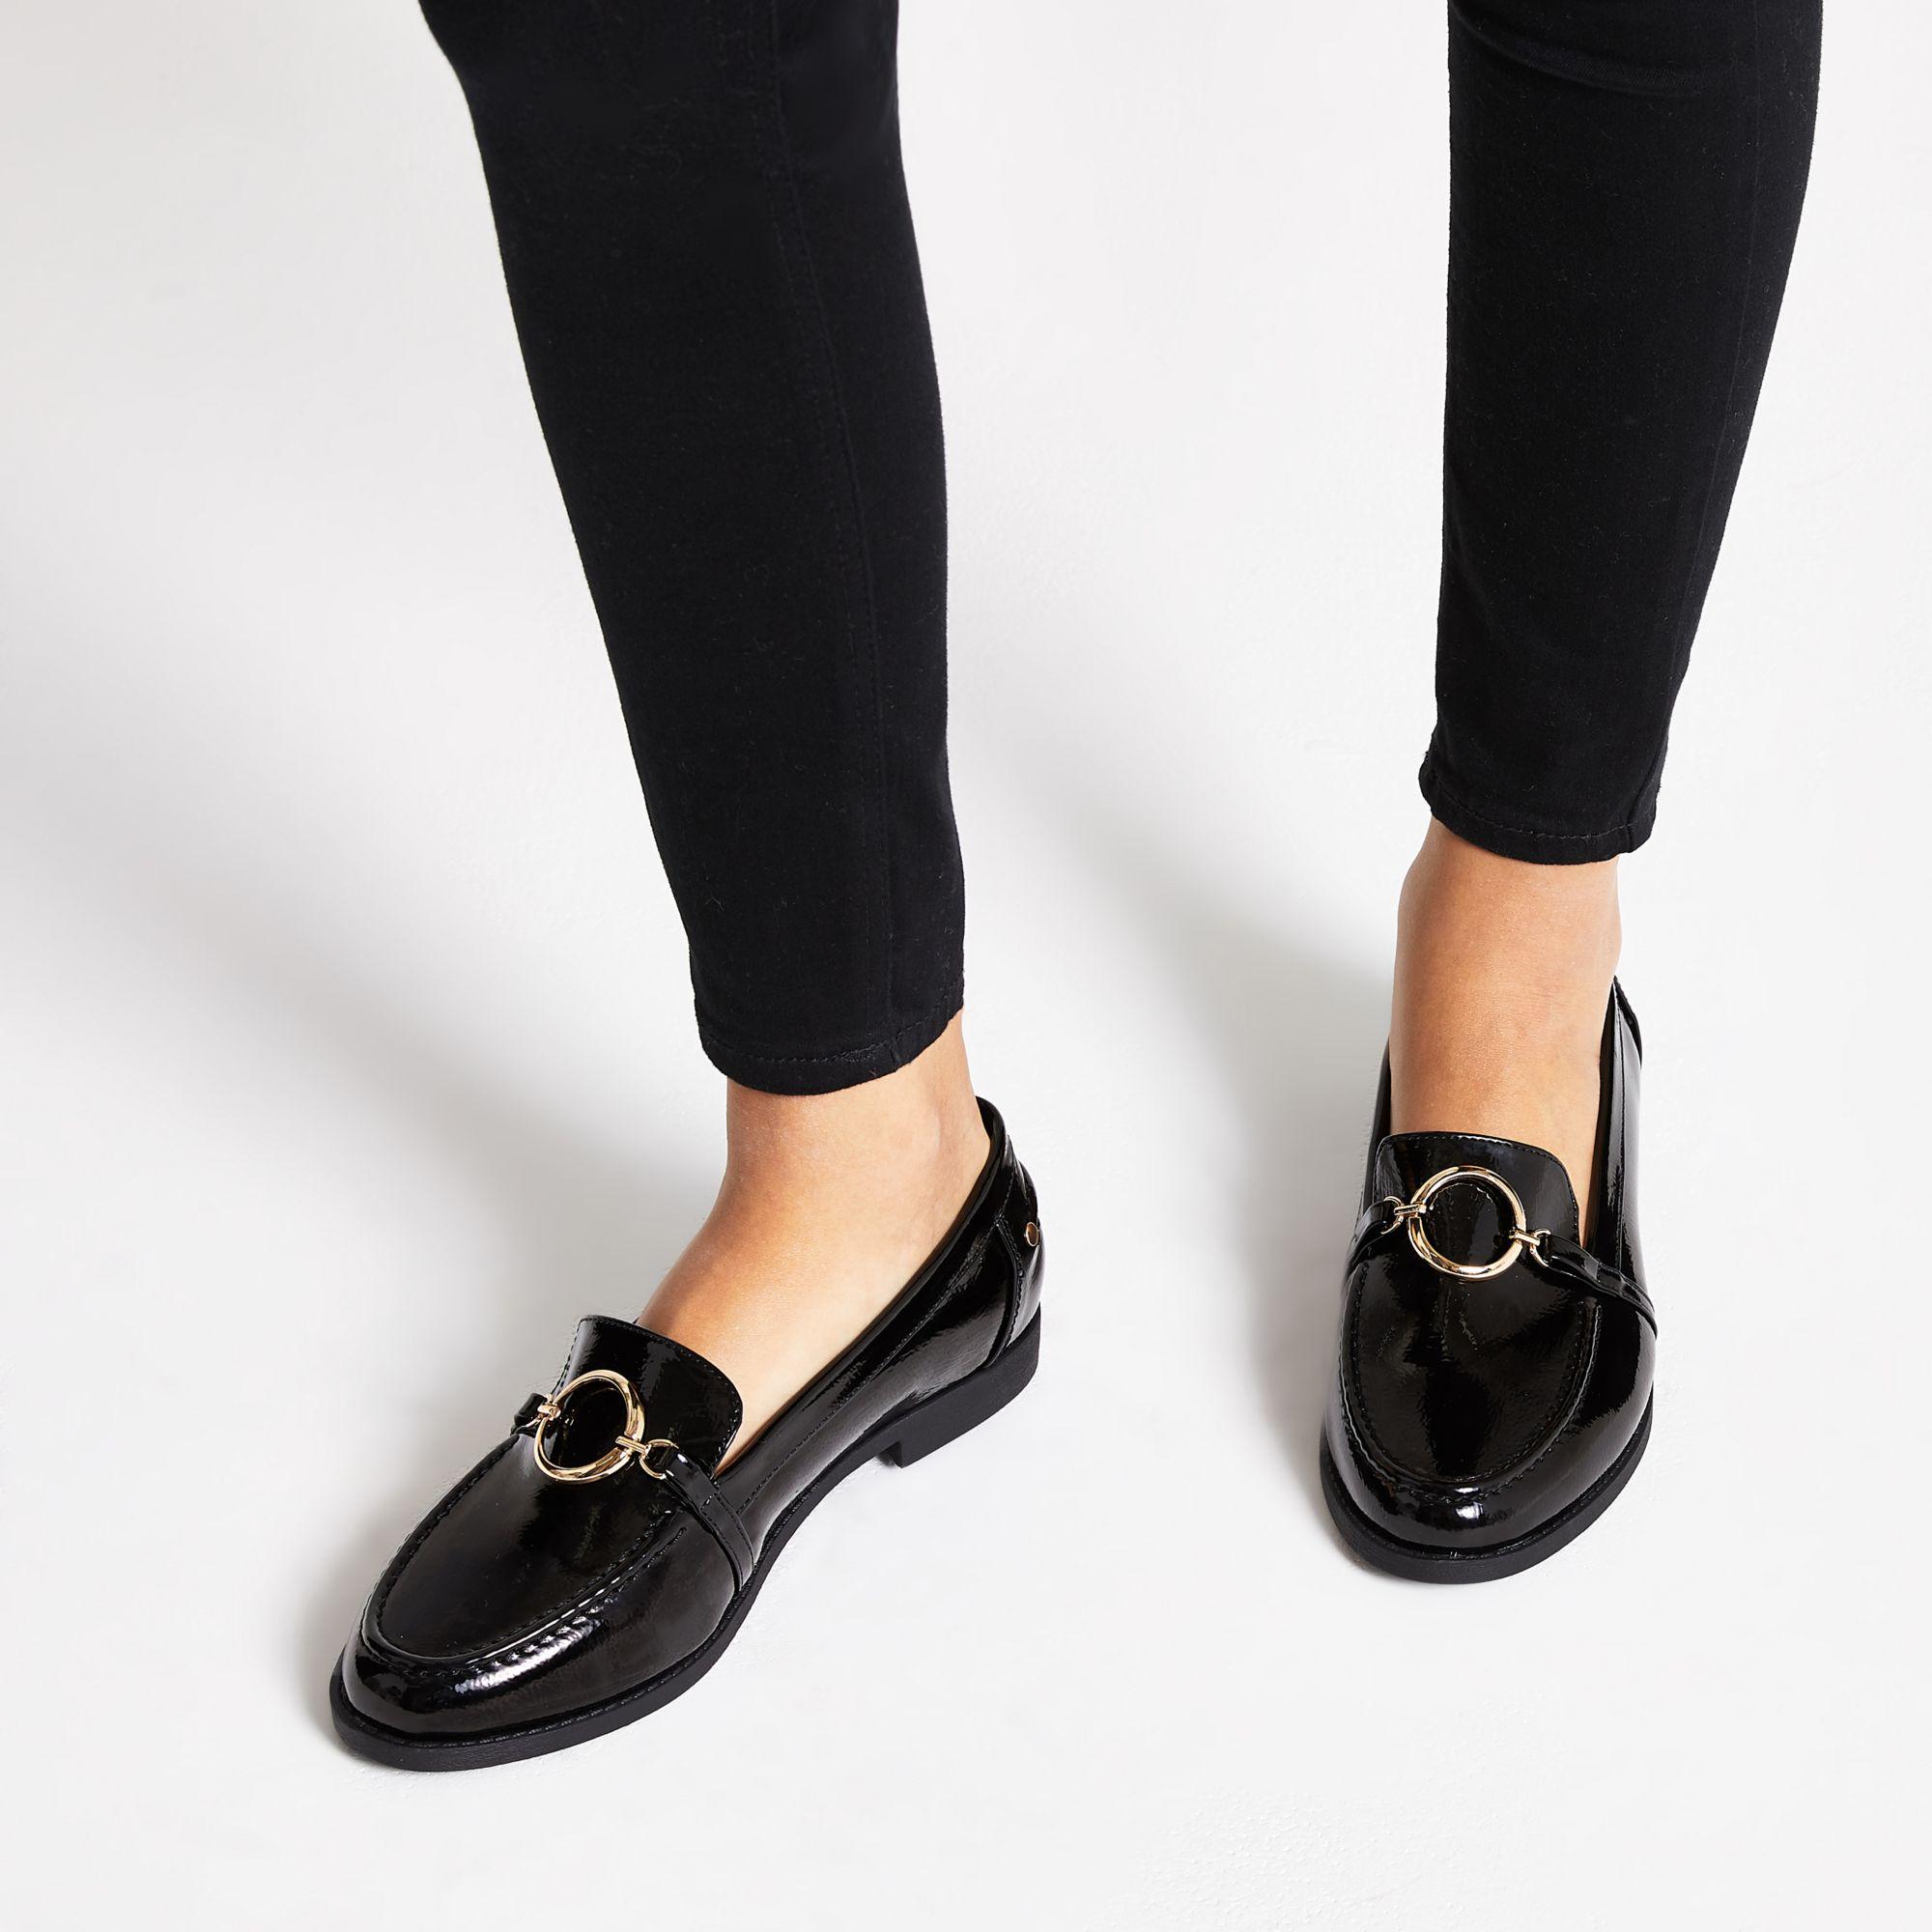 River Island Patent Circle Buckle Loafer in Black - Lyst